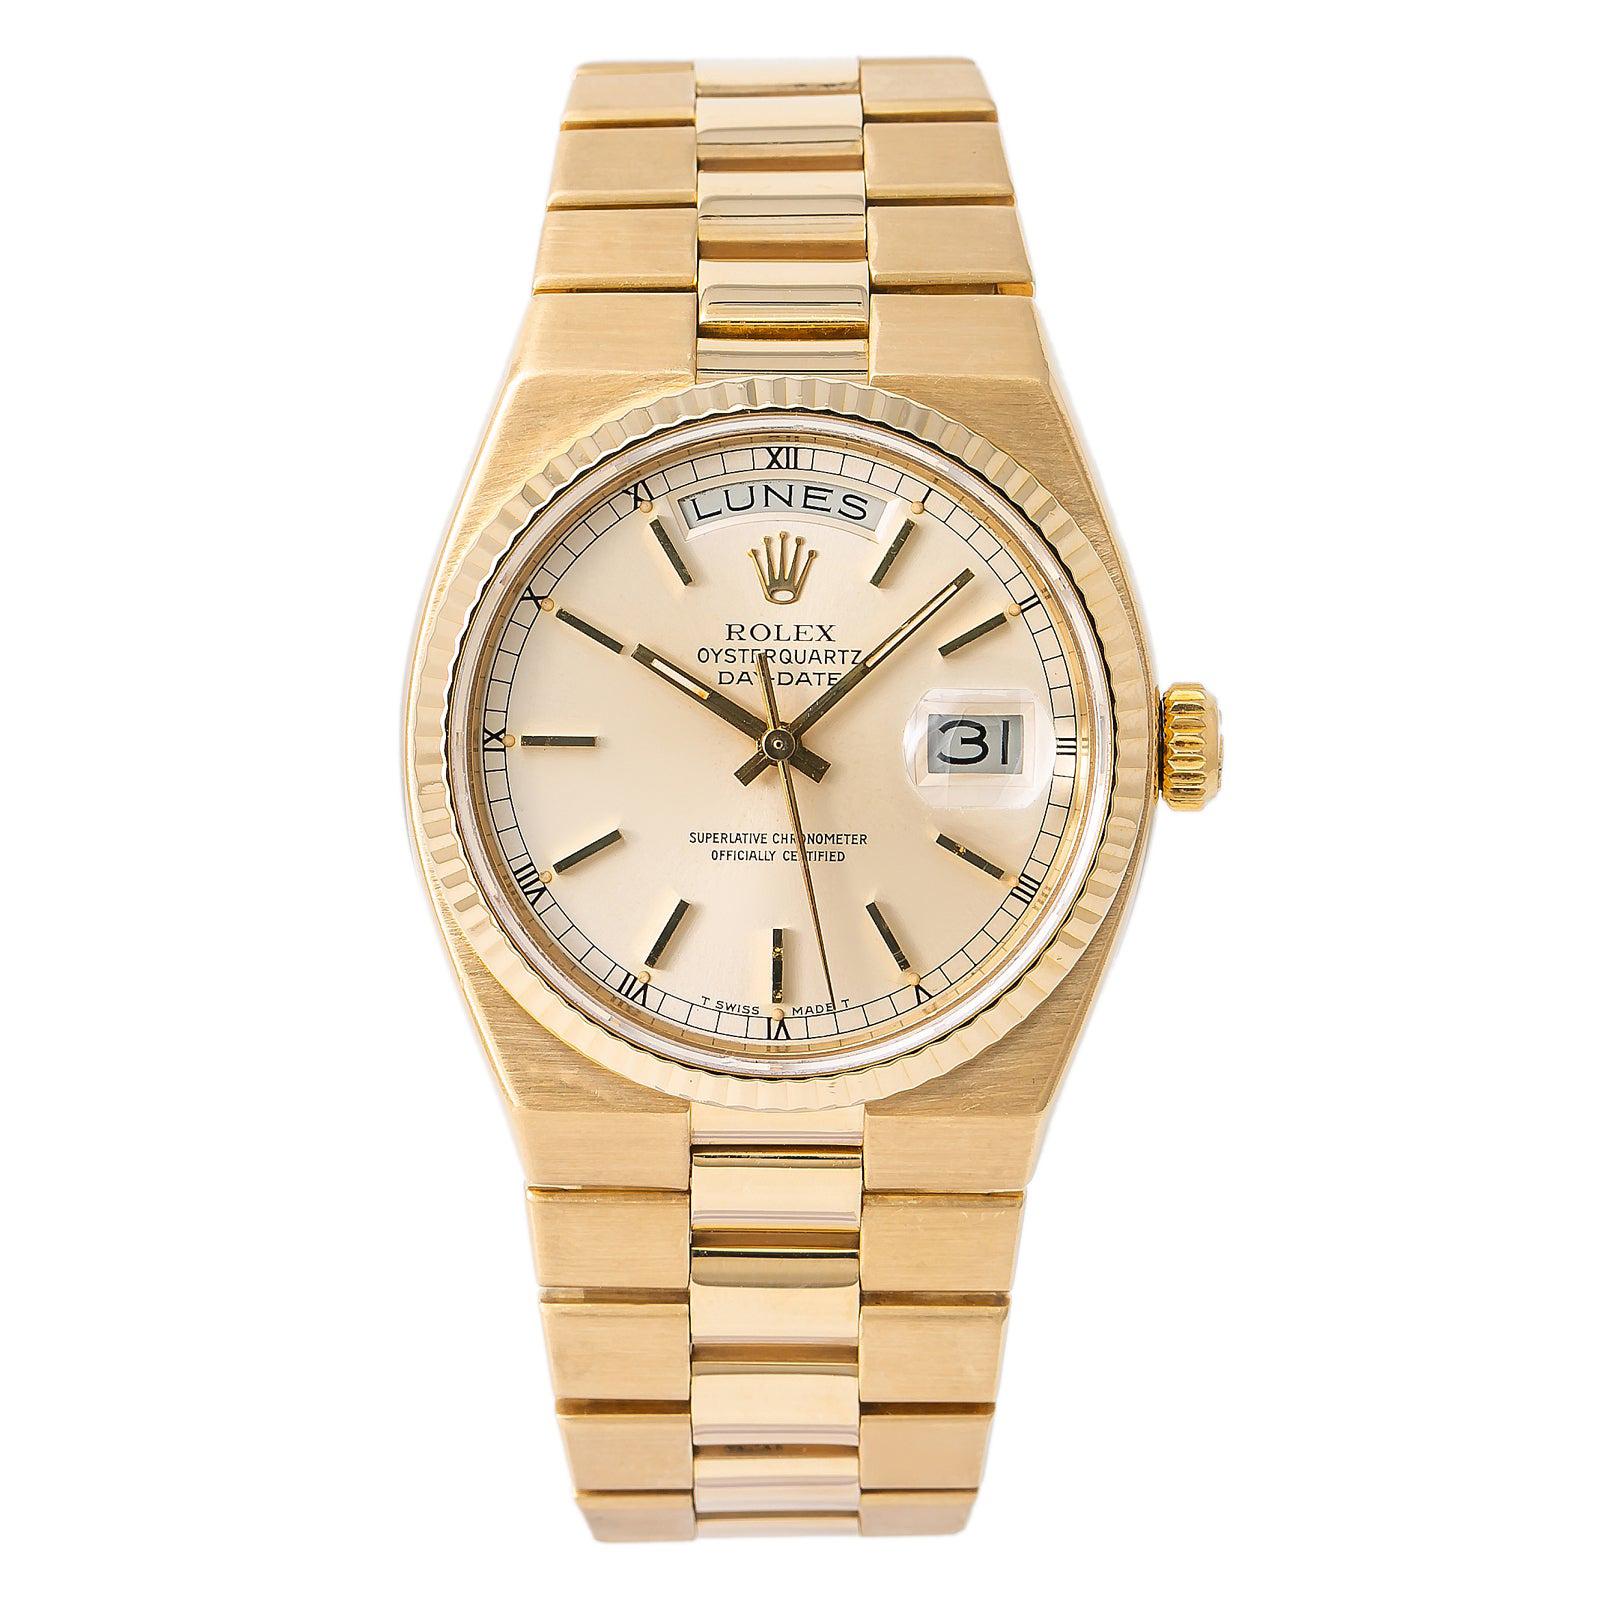 Rolex Day-Date Oyster quartz President 19018 Men Watch Silver Dial 18k Gold 36mm For Sale